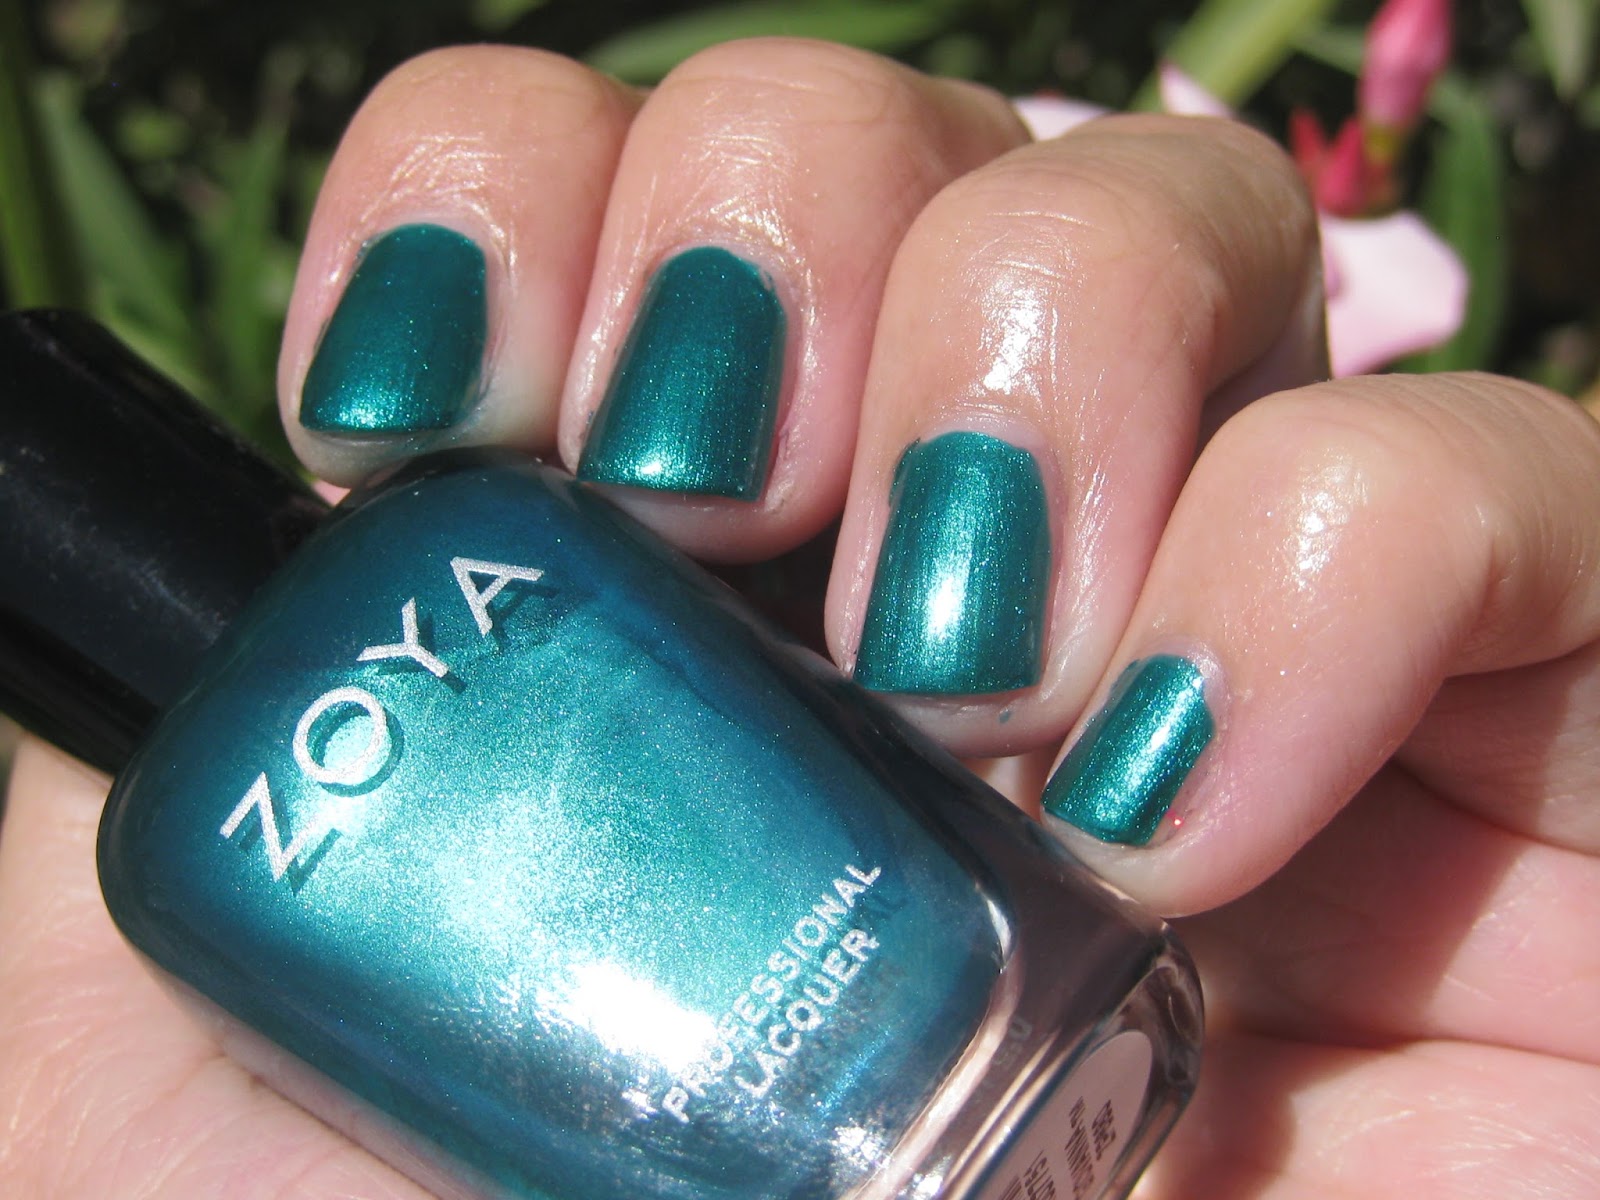 Zoya Fall 2013: Satin Nail Polish Collection Swatches, Review - The ...